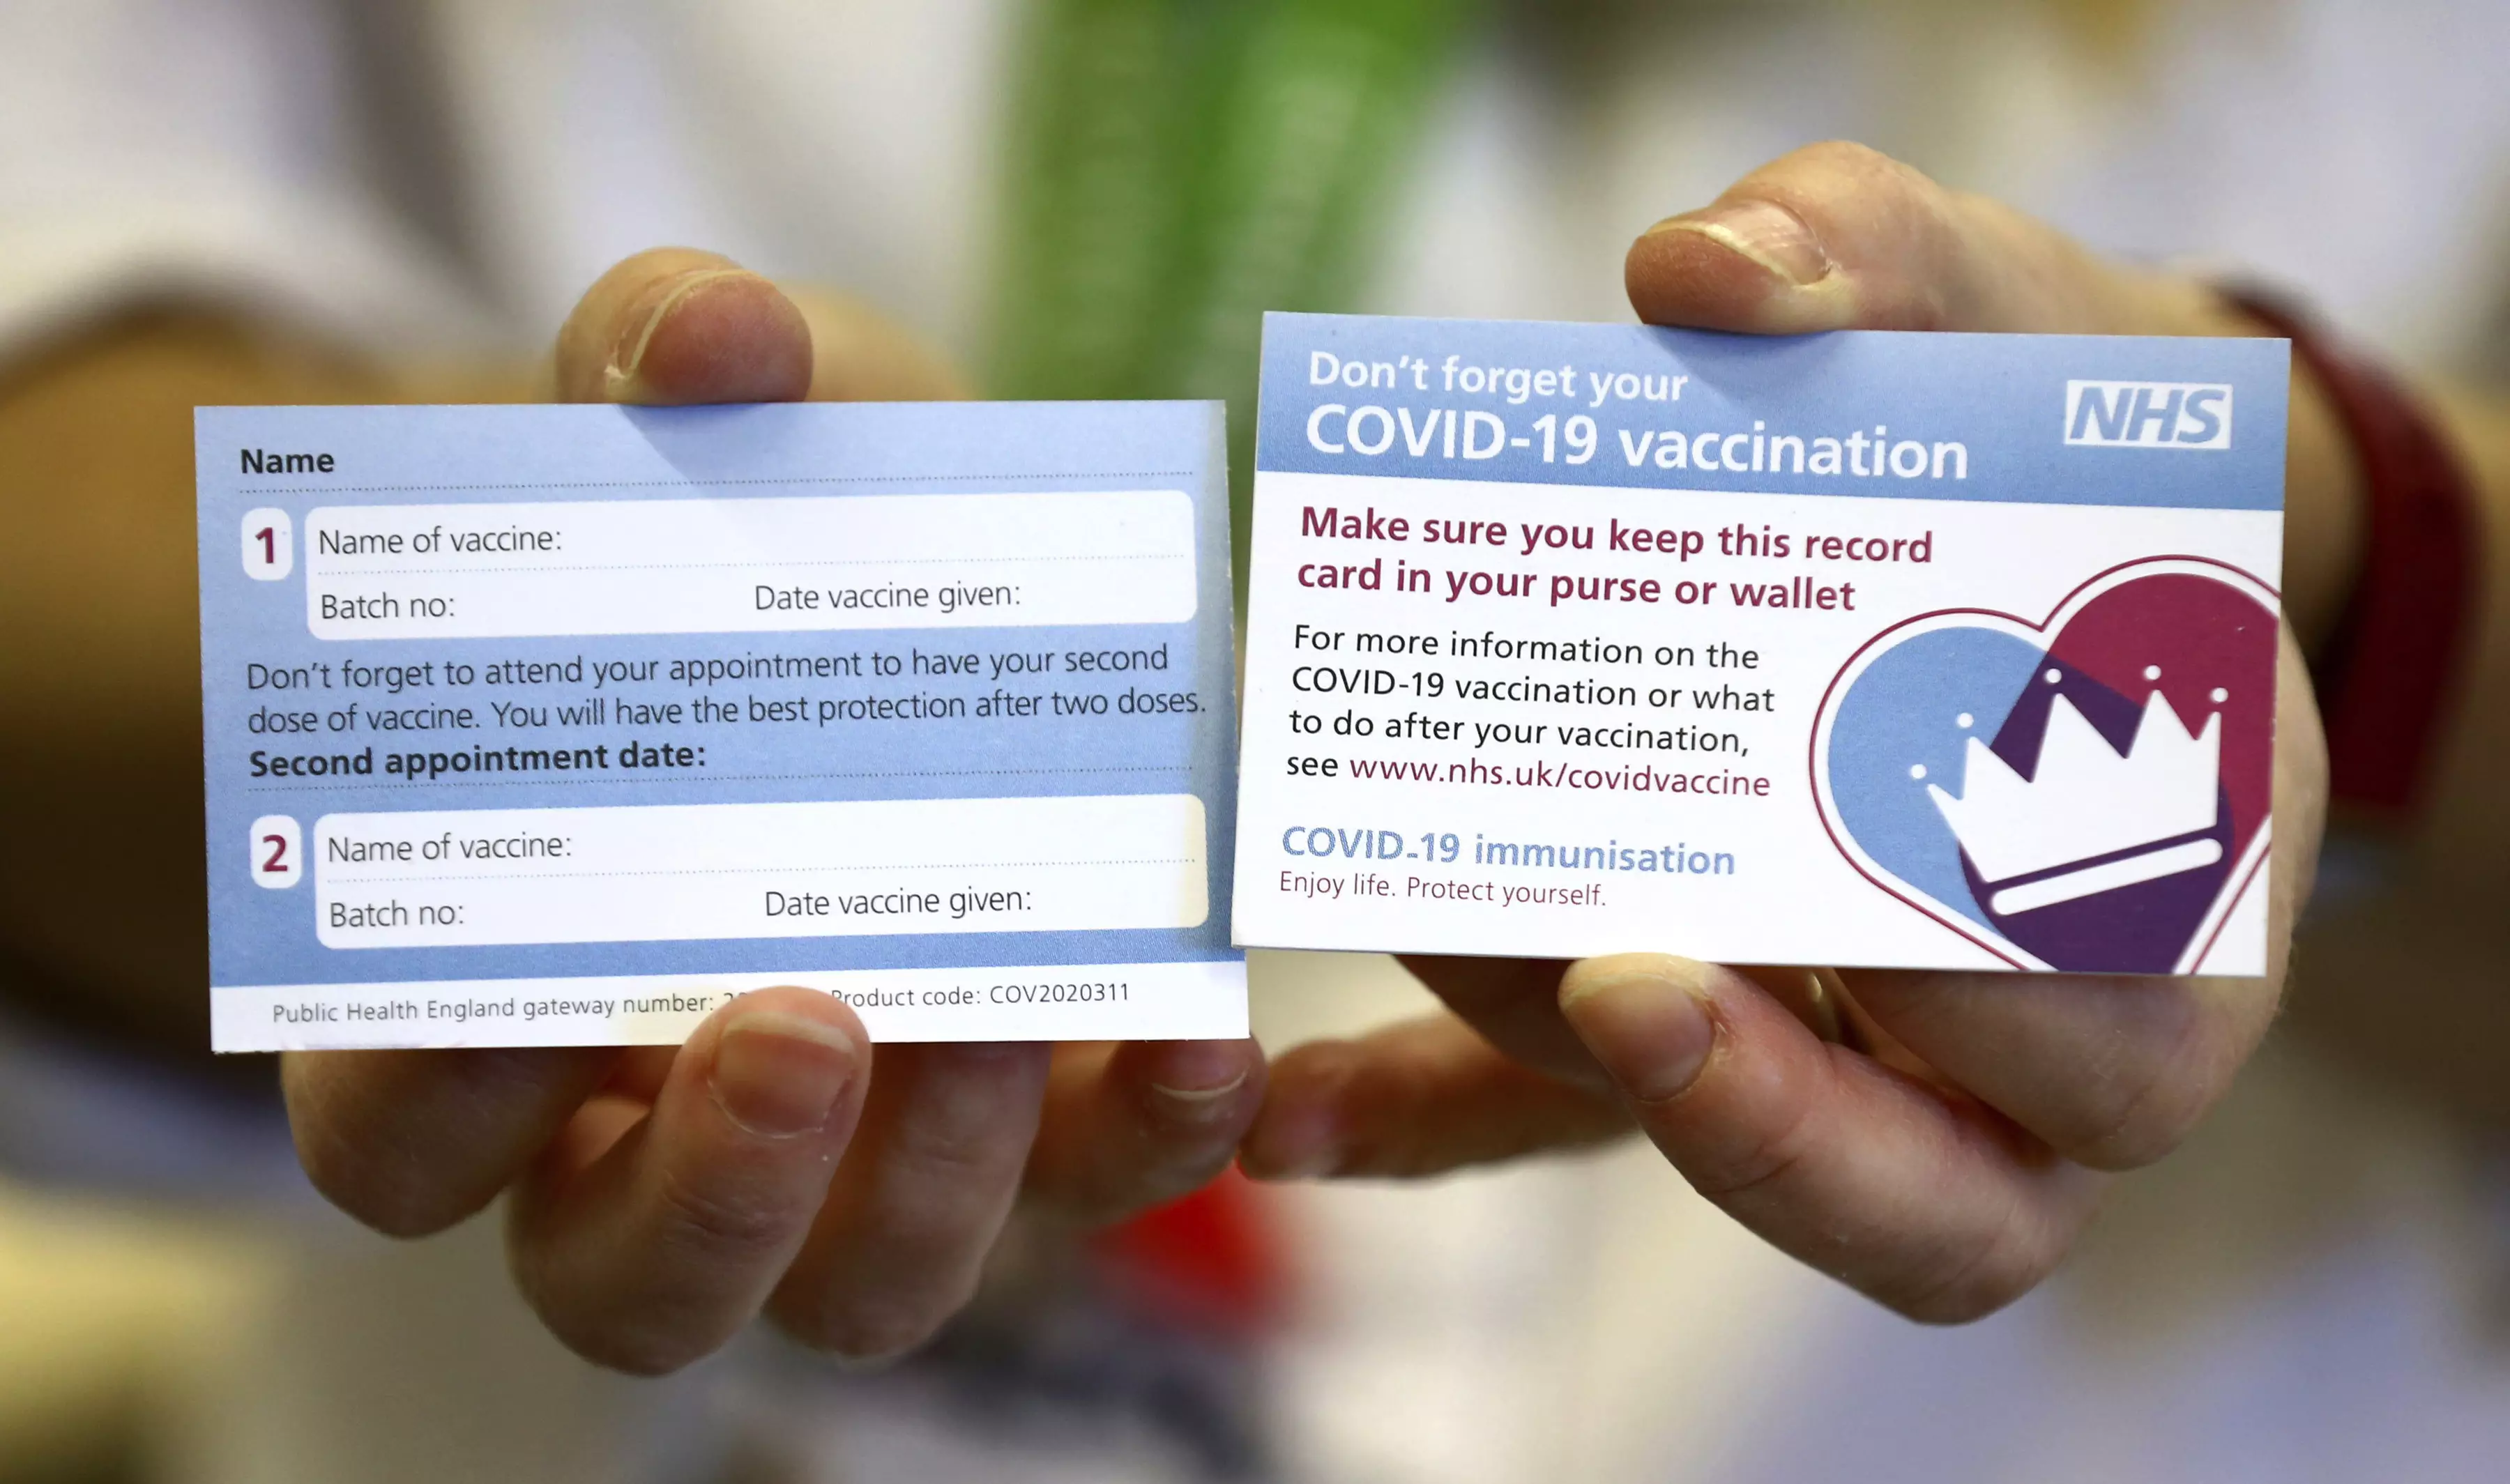 The card people will be given after receiving the coronavirus vaccine.